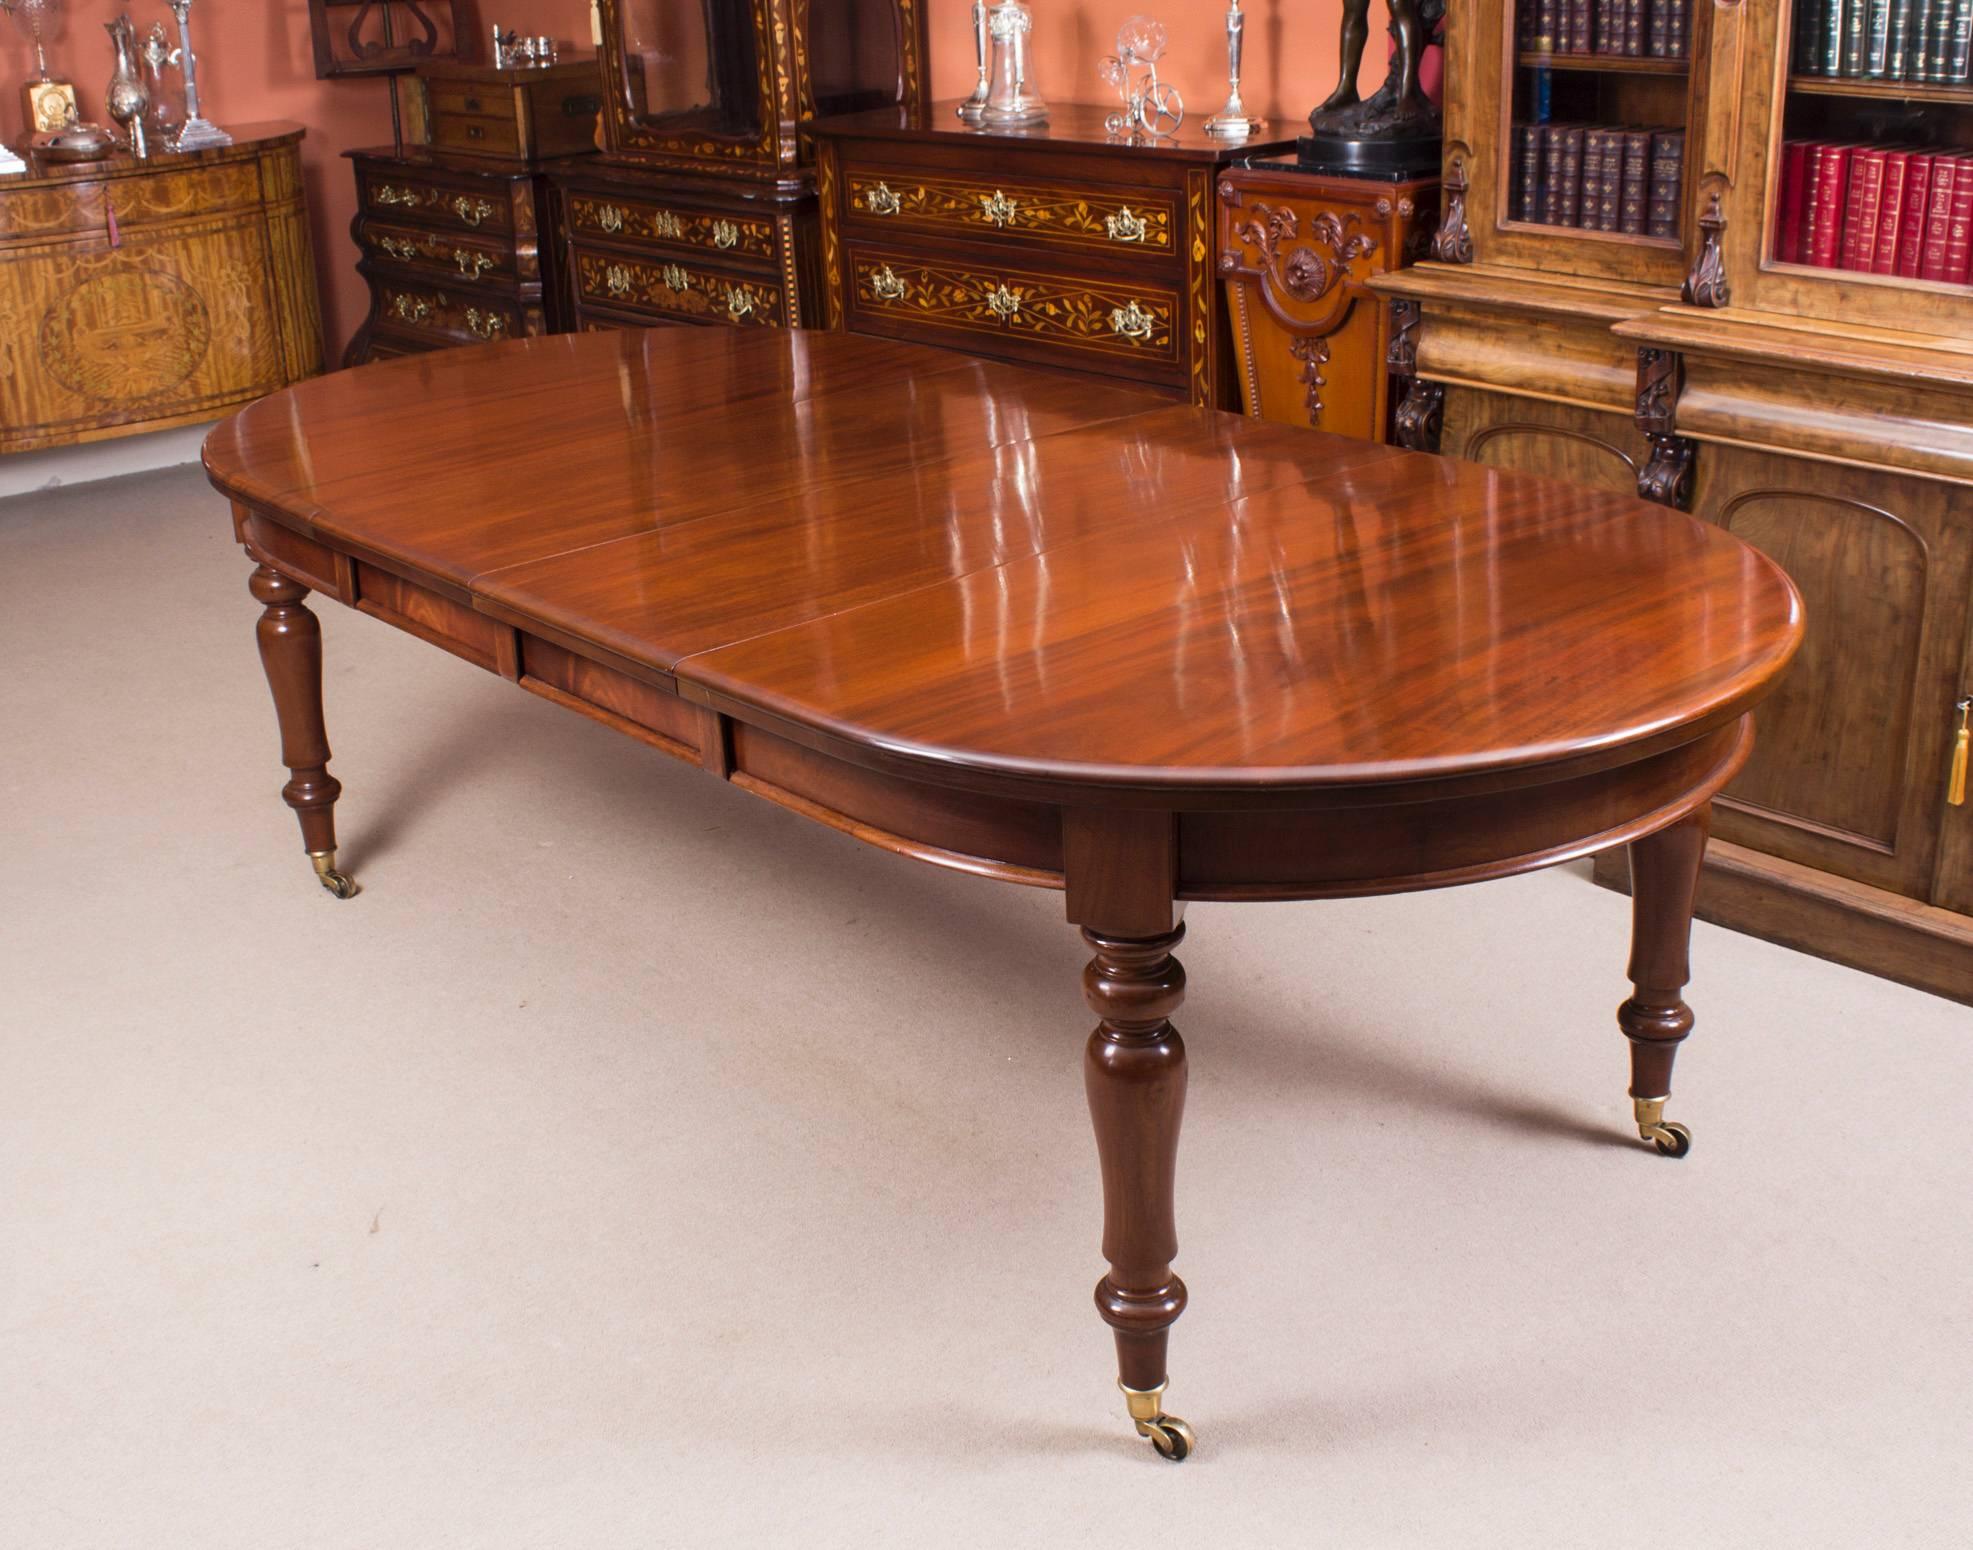 This is a fabulous dining set comprising an antique Victorian mahogany rounded rectangular extending dining table, circa 1880 in date with a set of eight Victorian style admiralty back dining chairs dating from the late 20th century.

The table